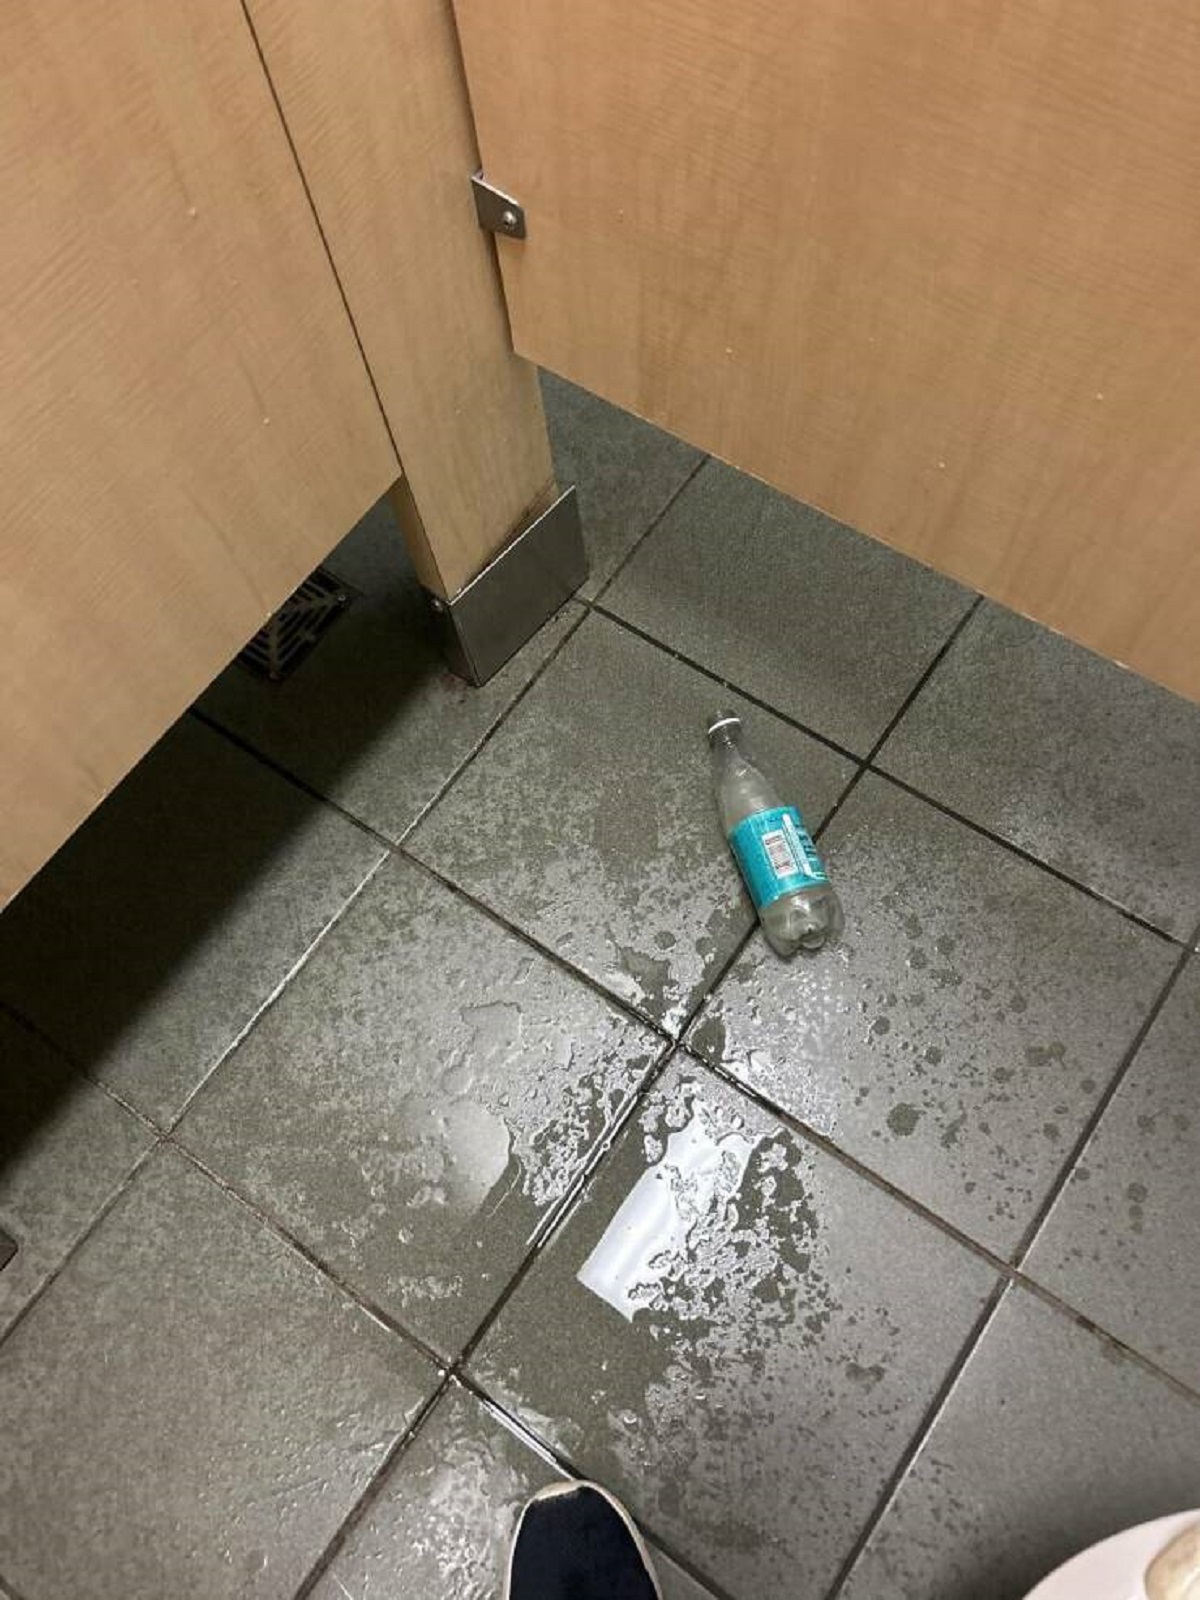 "Some kid thought it would be funny to drop a whole open bottle of soda on me while I was taking a dump"